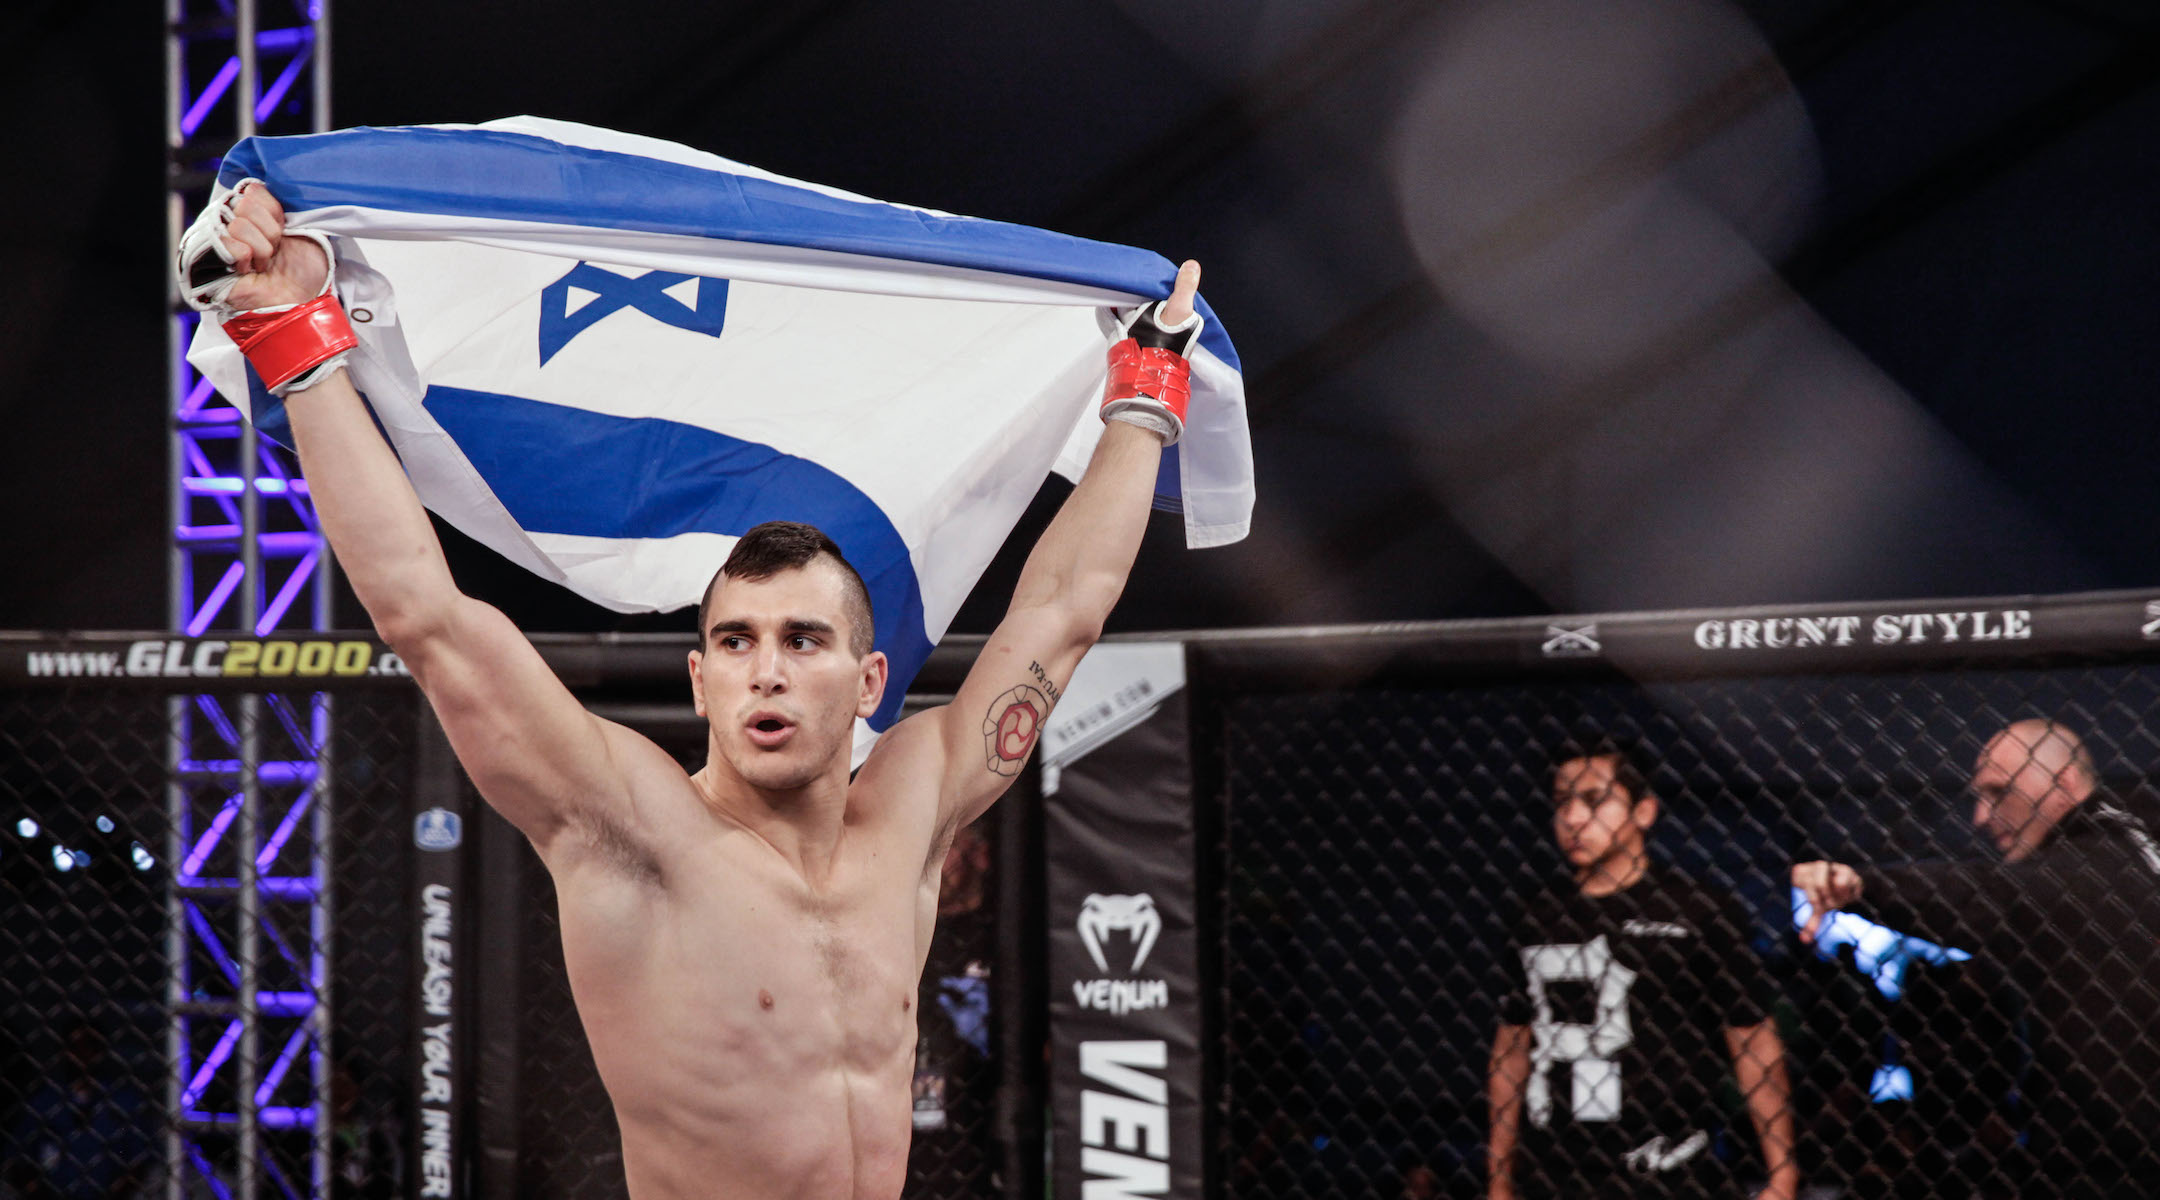 Natan Levy proudly shows an Israeli flag before his matches. (Amy Kaplan)